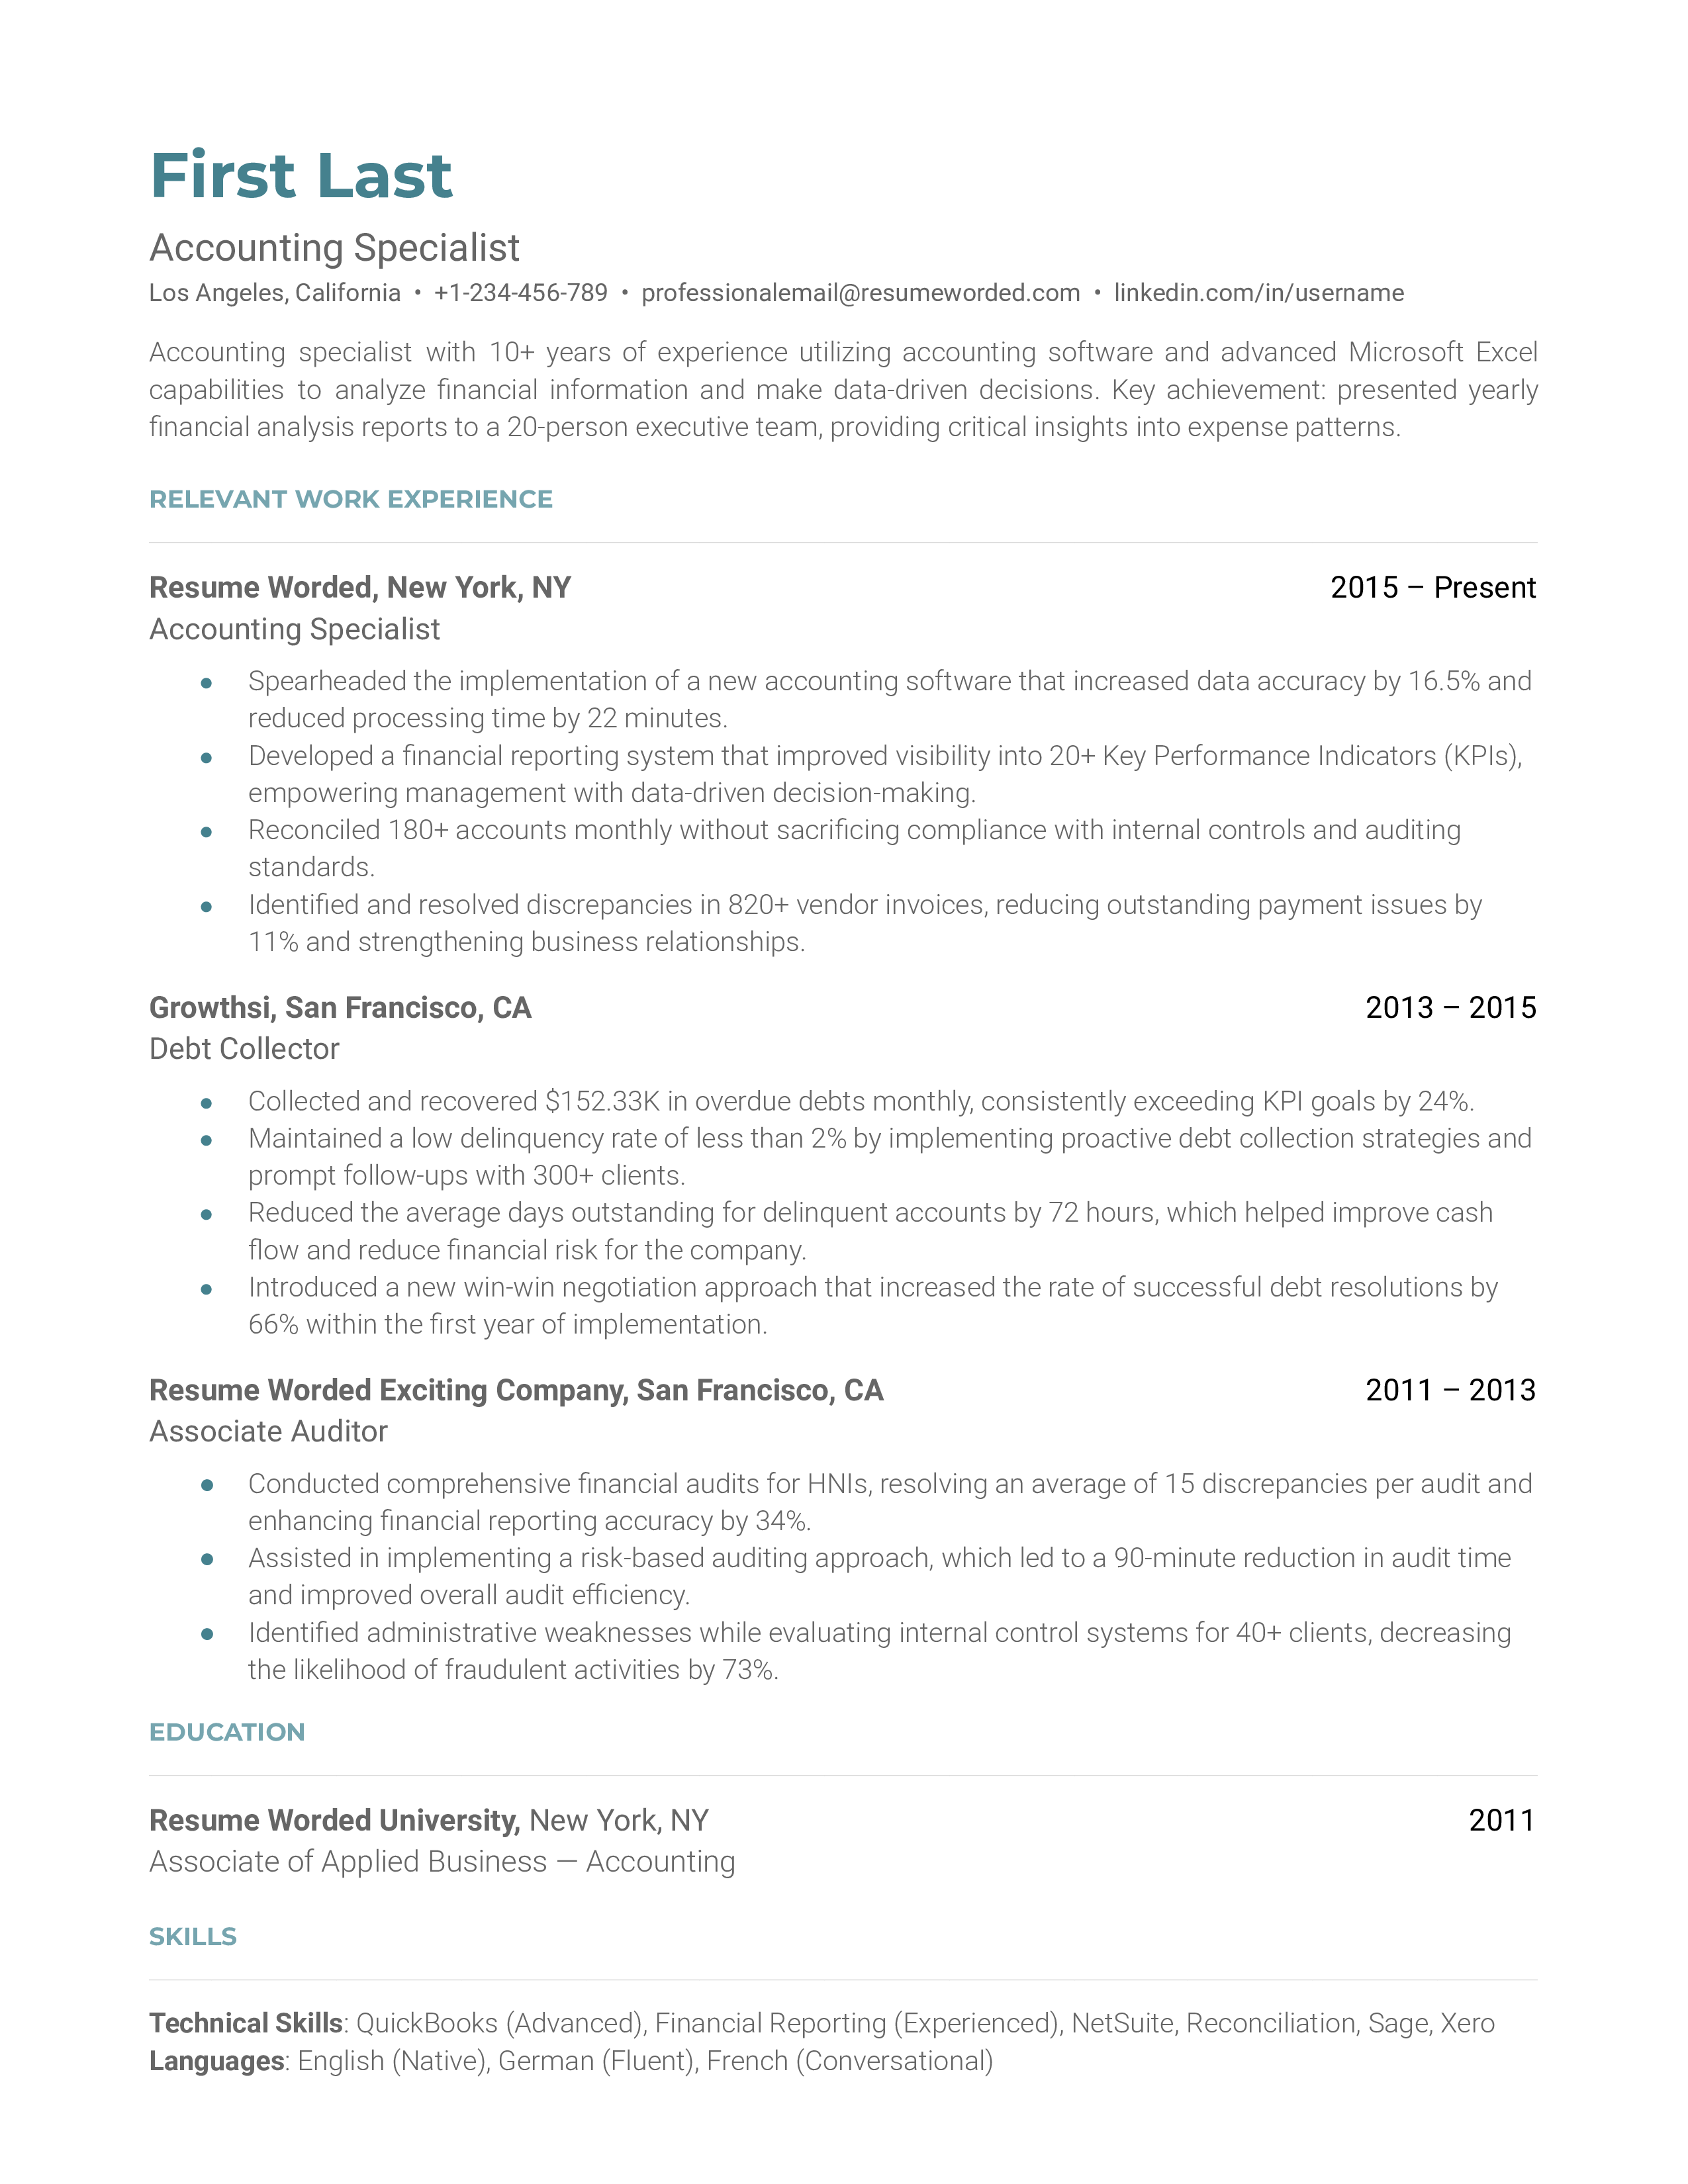 An example of a well-structured resume for an Accounting Specialist role.